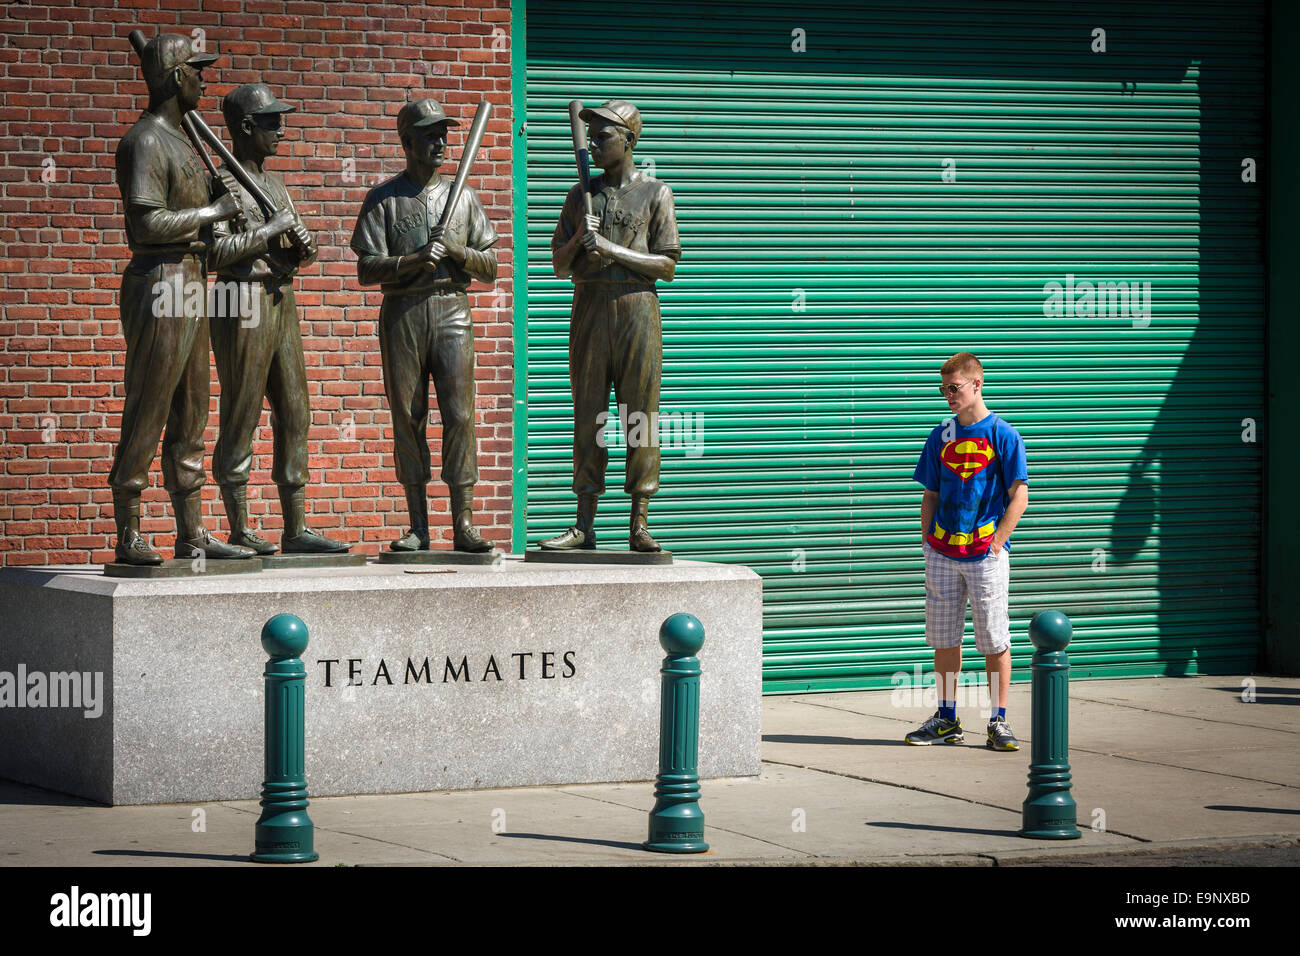 'Superman' studies the Teammates Statue sited outside the Boston Red Sox Stadium at Fenway Park in Boston, Massachusetts - USA. Stock Photo